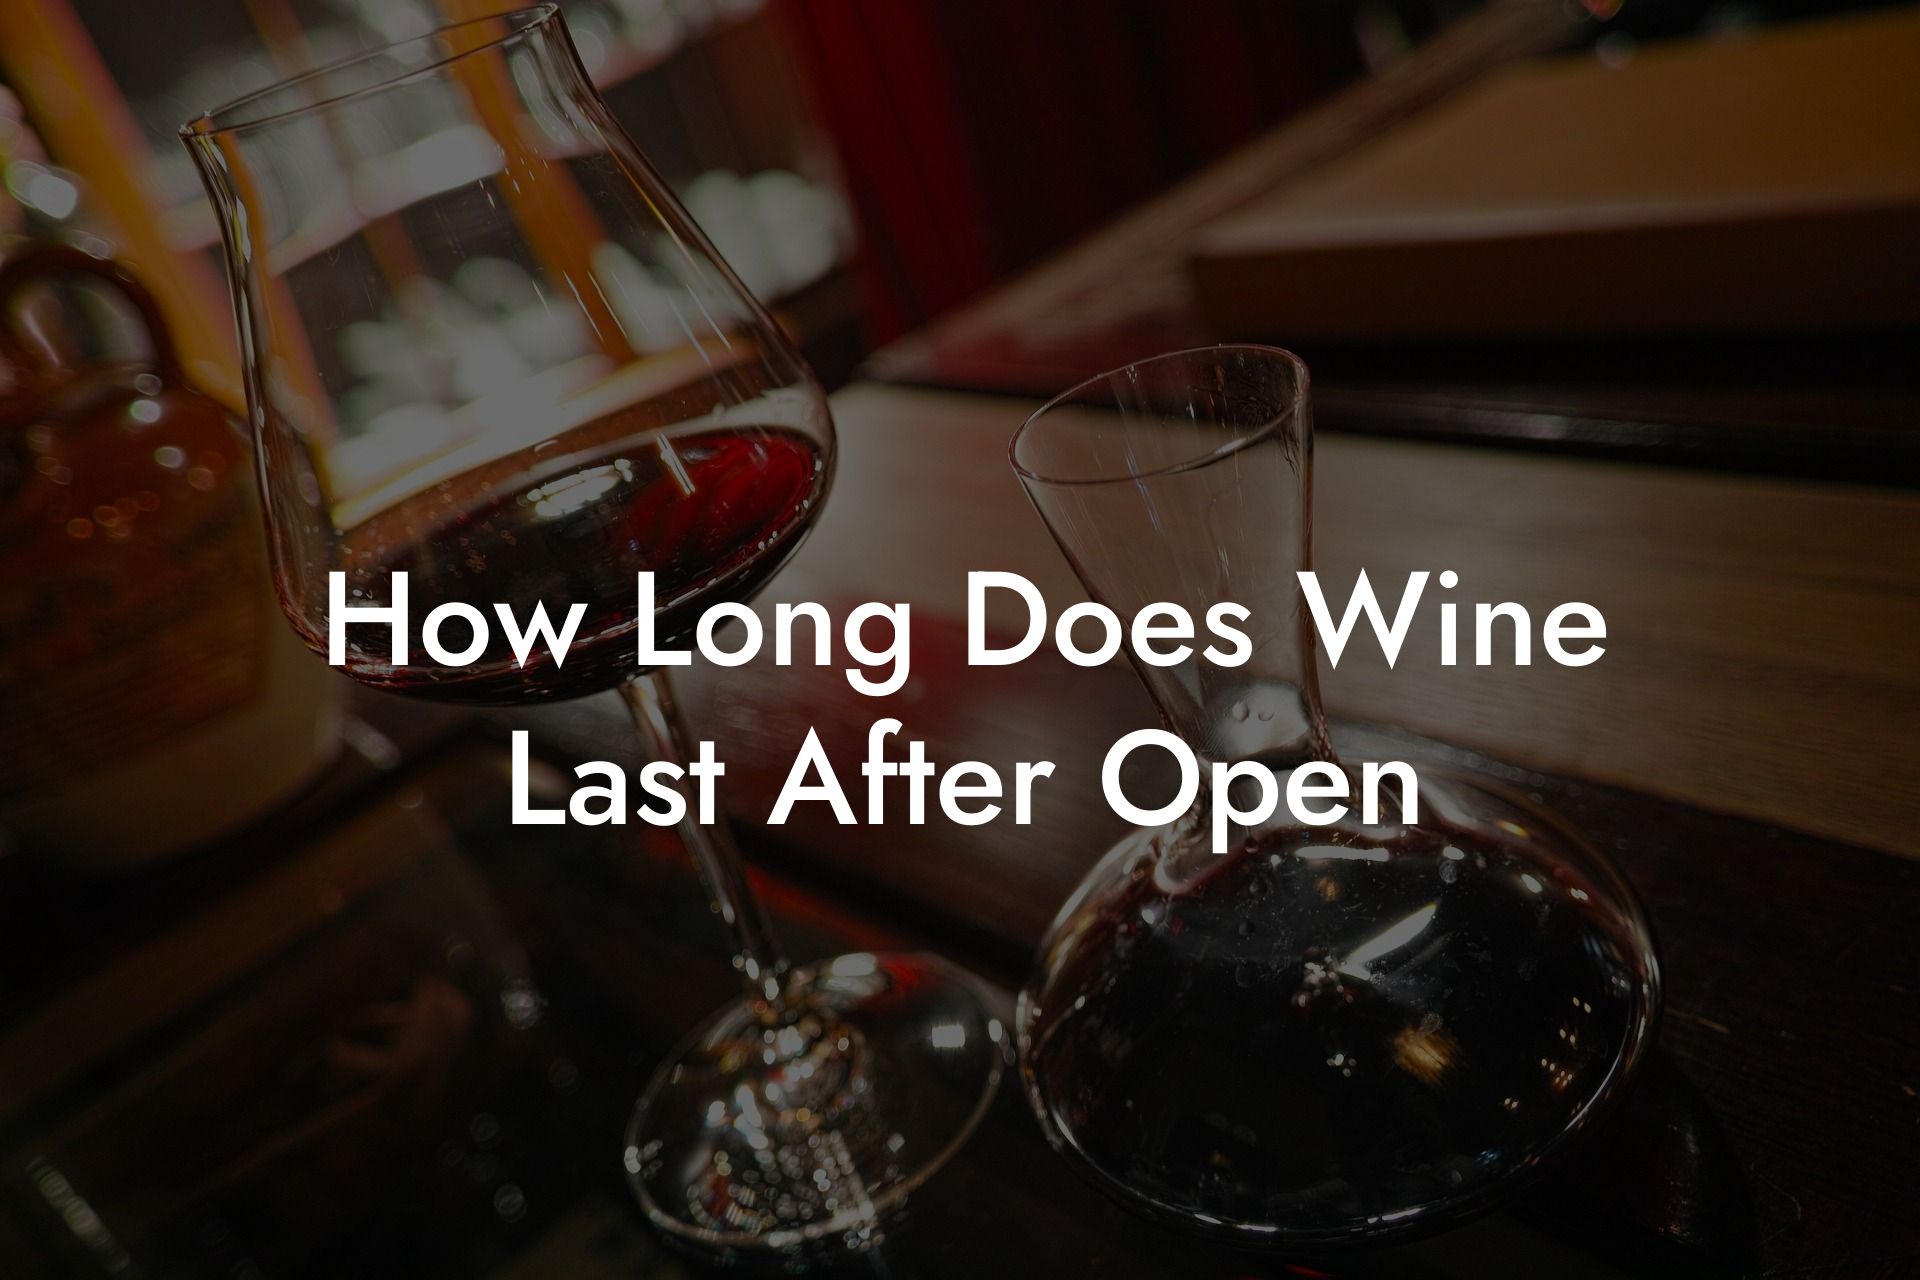 How Long Does Wine Last After Open